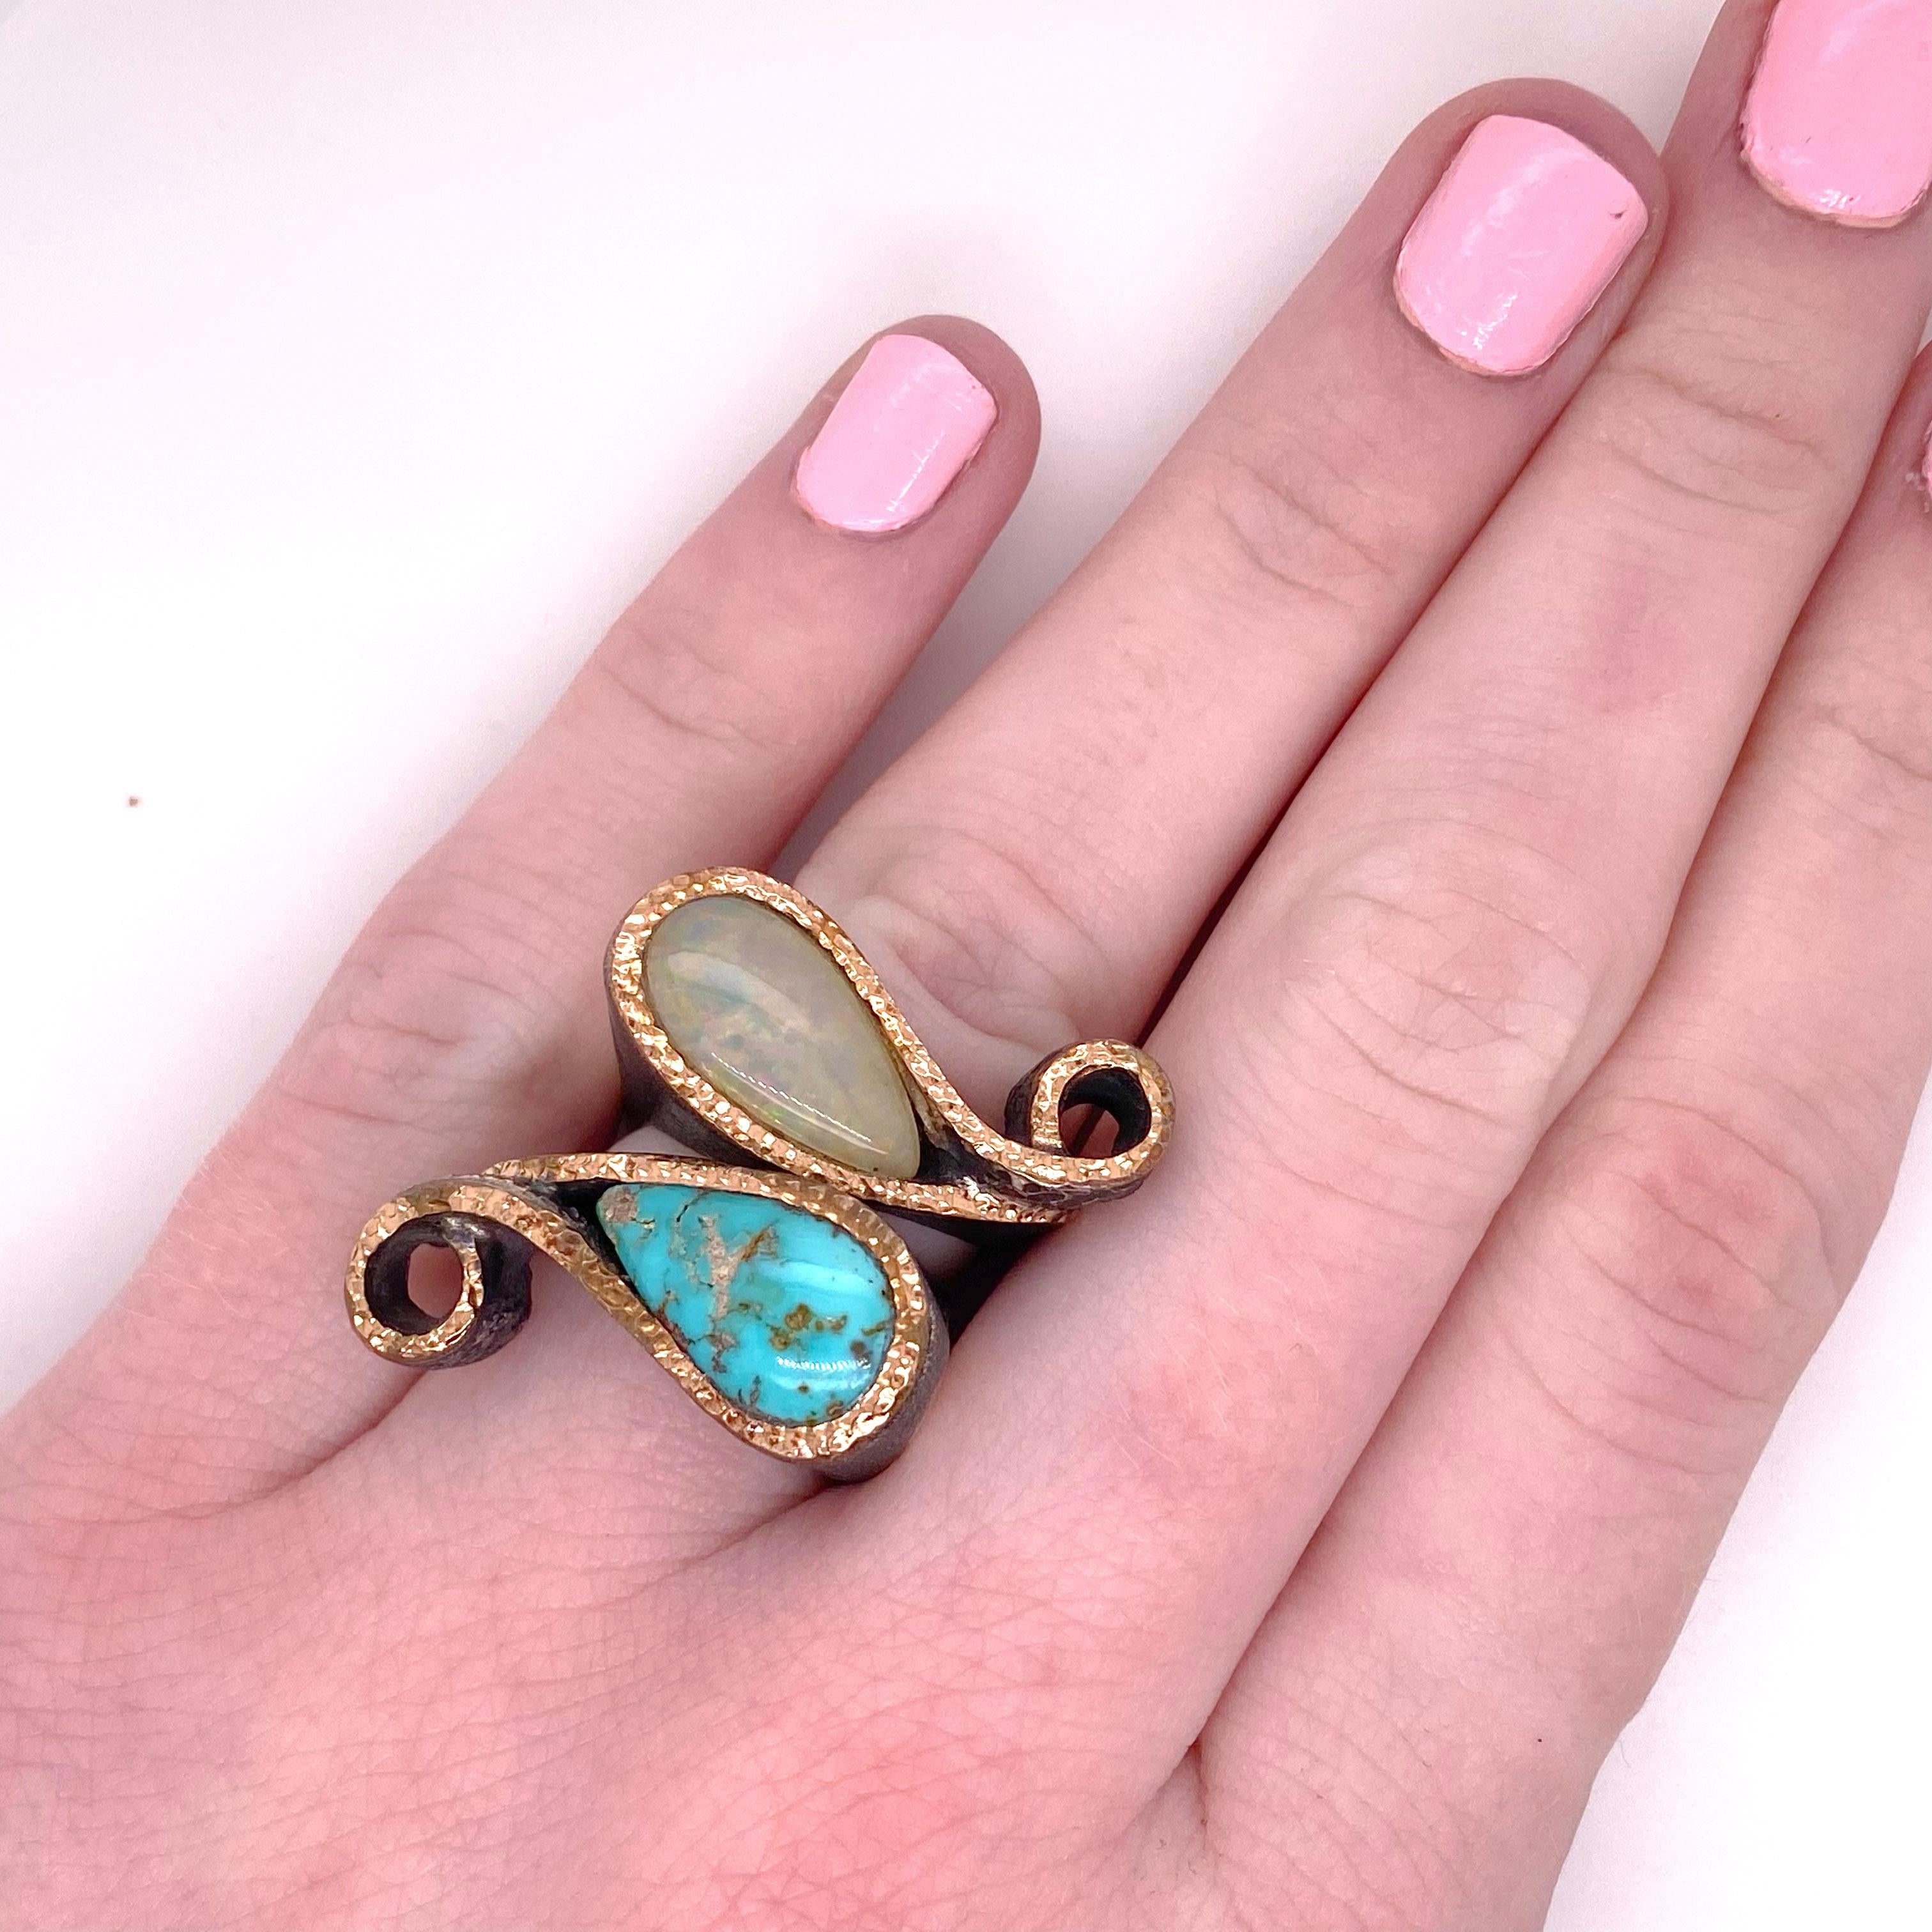 Pear Cut Opal Statement Ring, Mixed Metal Ring Pear Shaped Opal, Australian Opal Ring For Sale